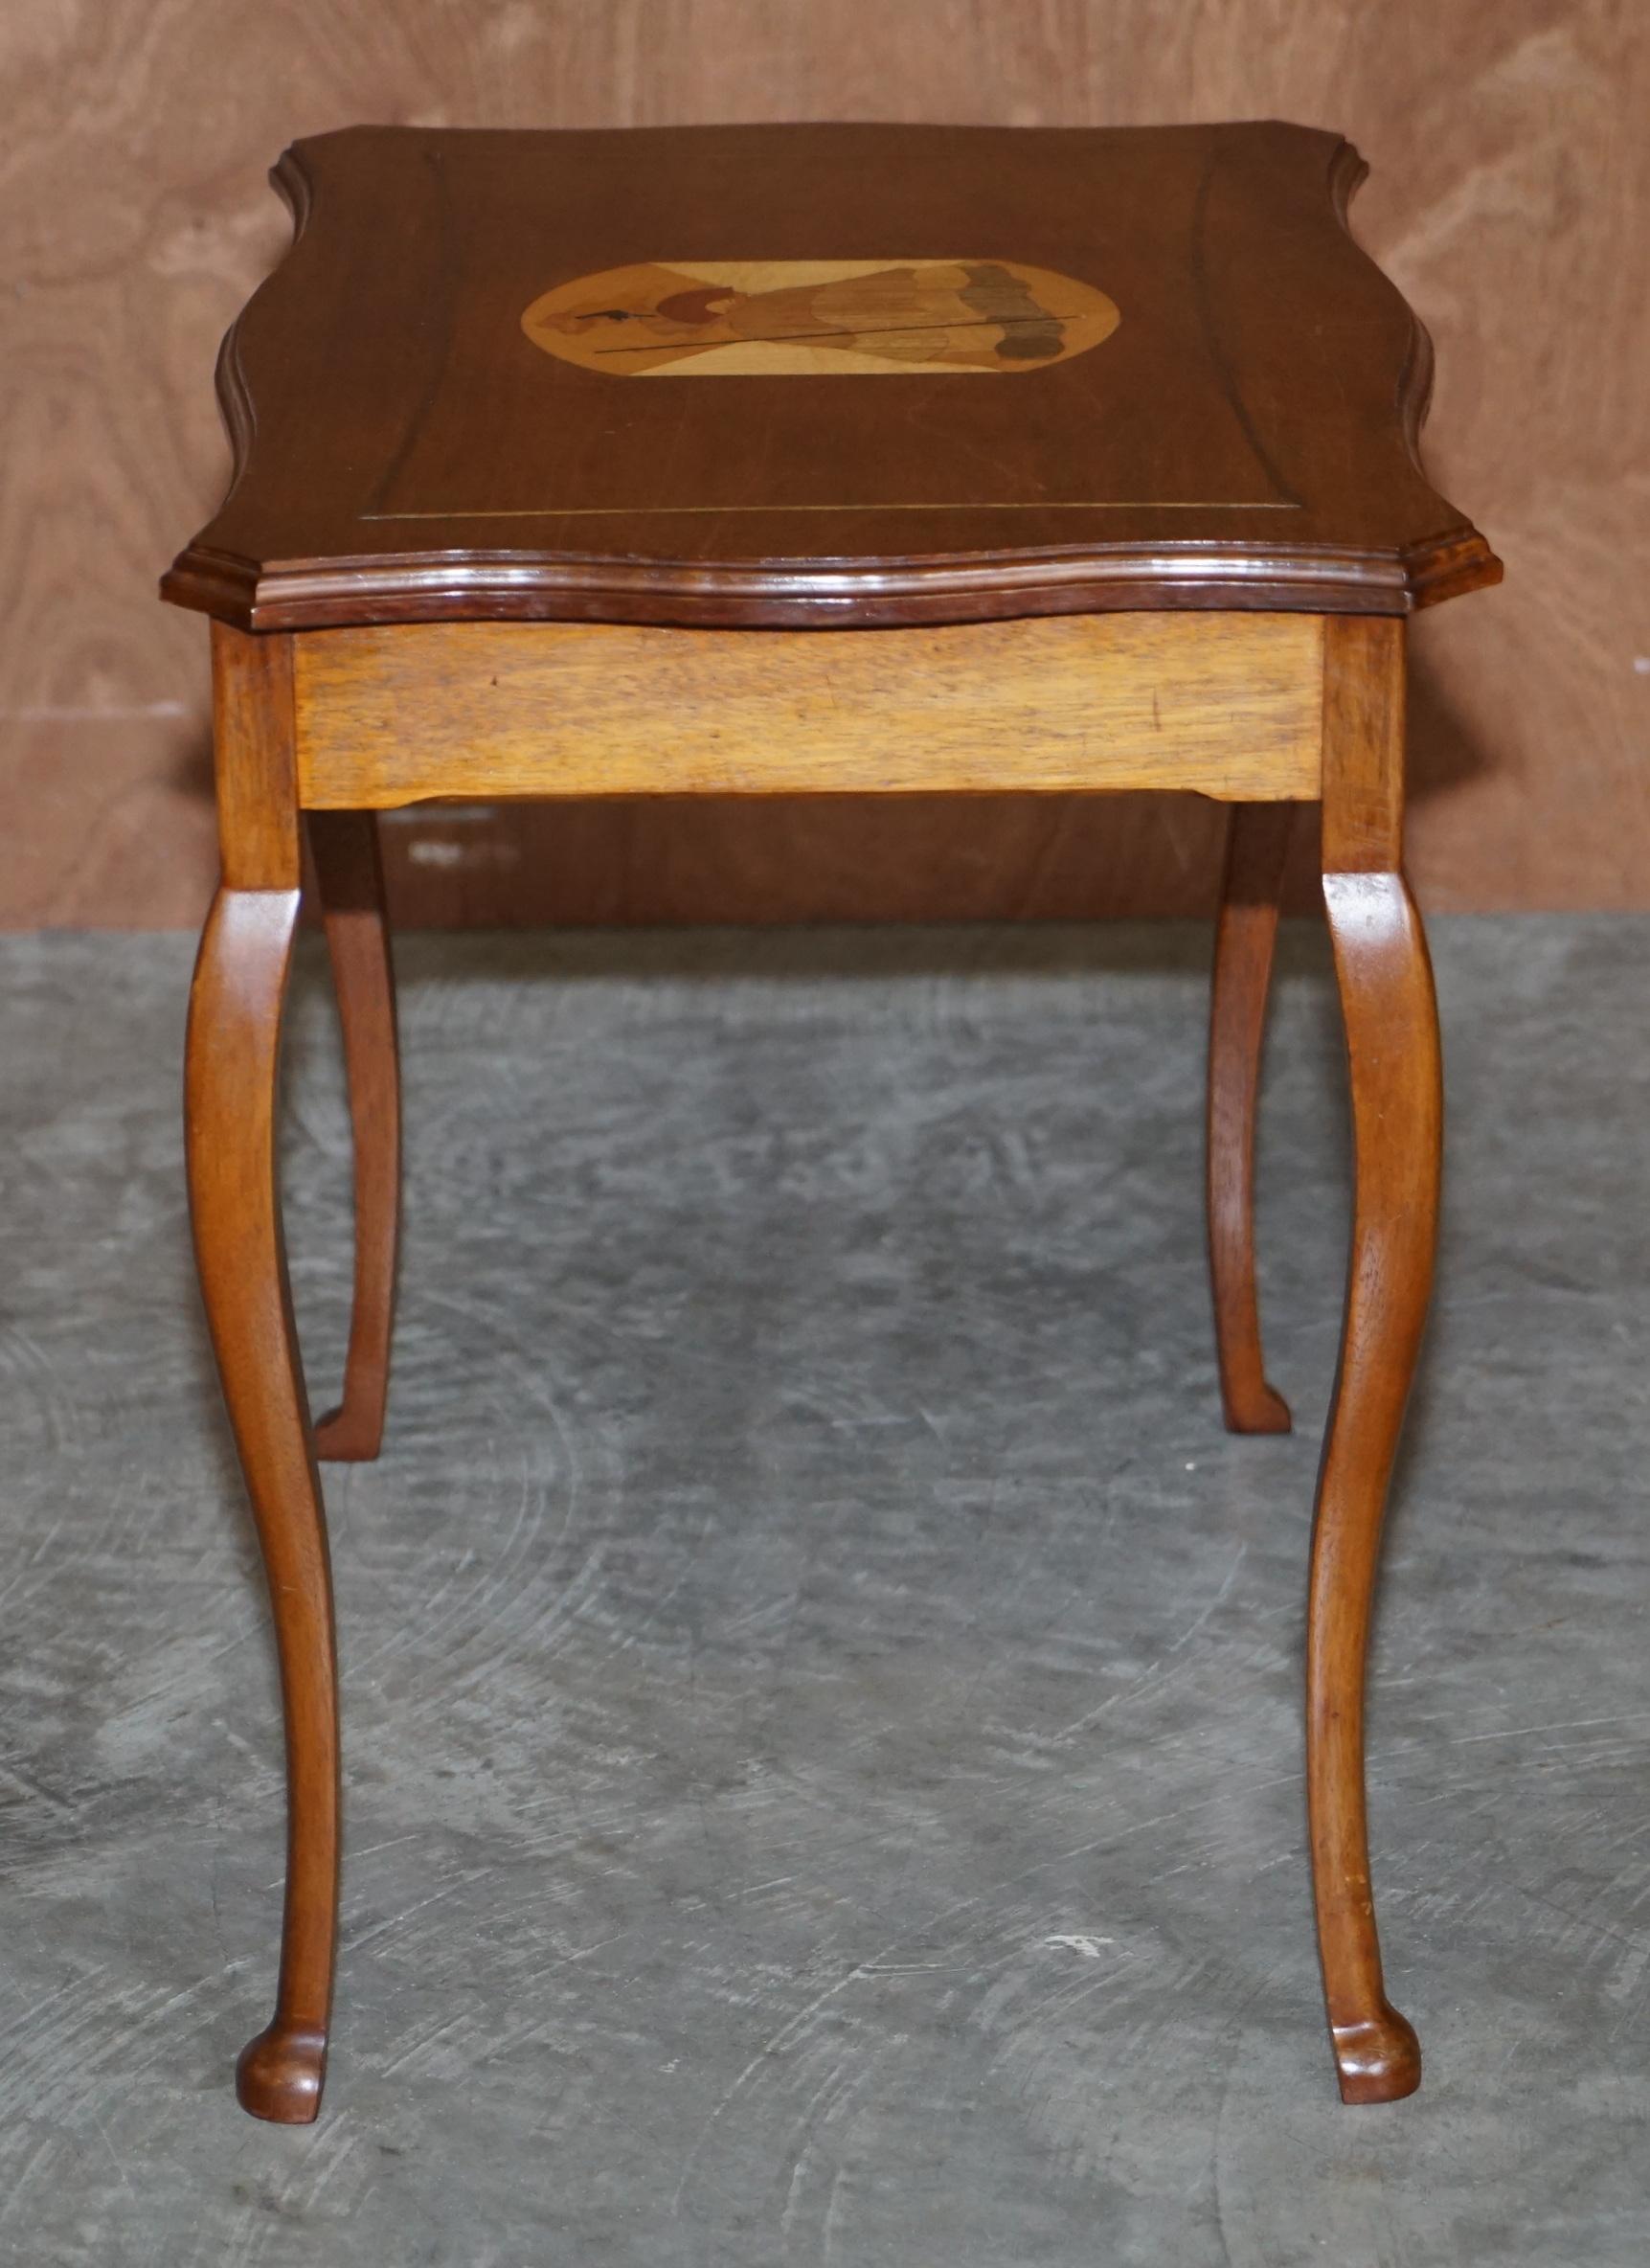 Beech Vintage Nest of Tables with Hand Painted Marquetry Inlaid Tops Very Decorative For Sale